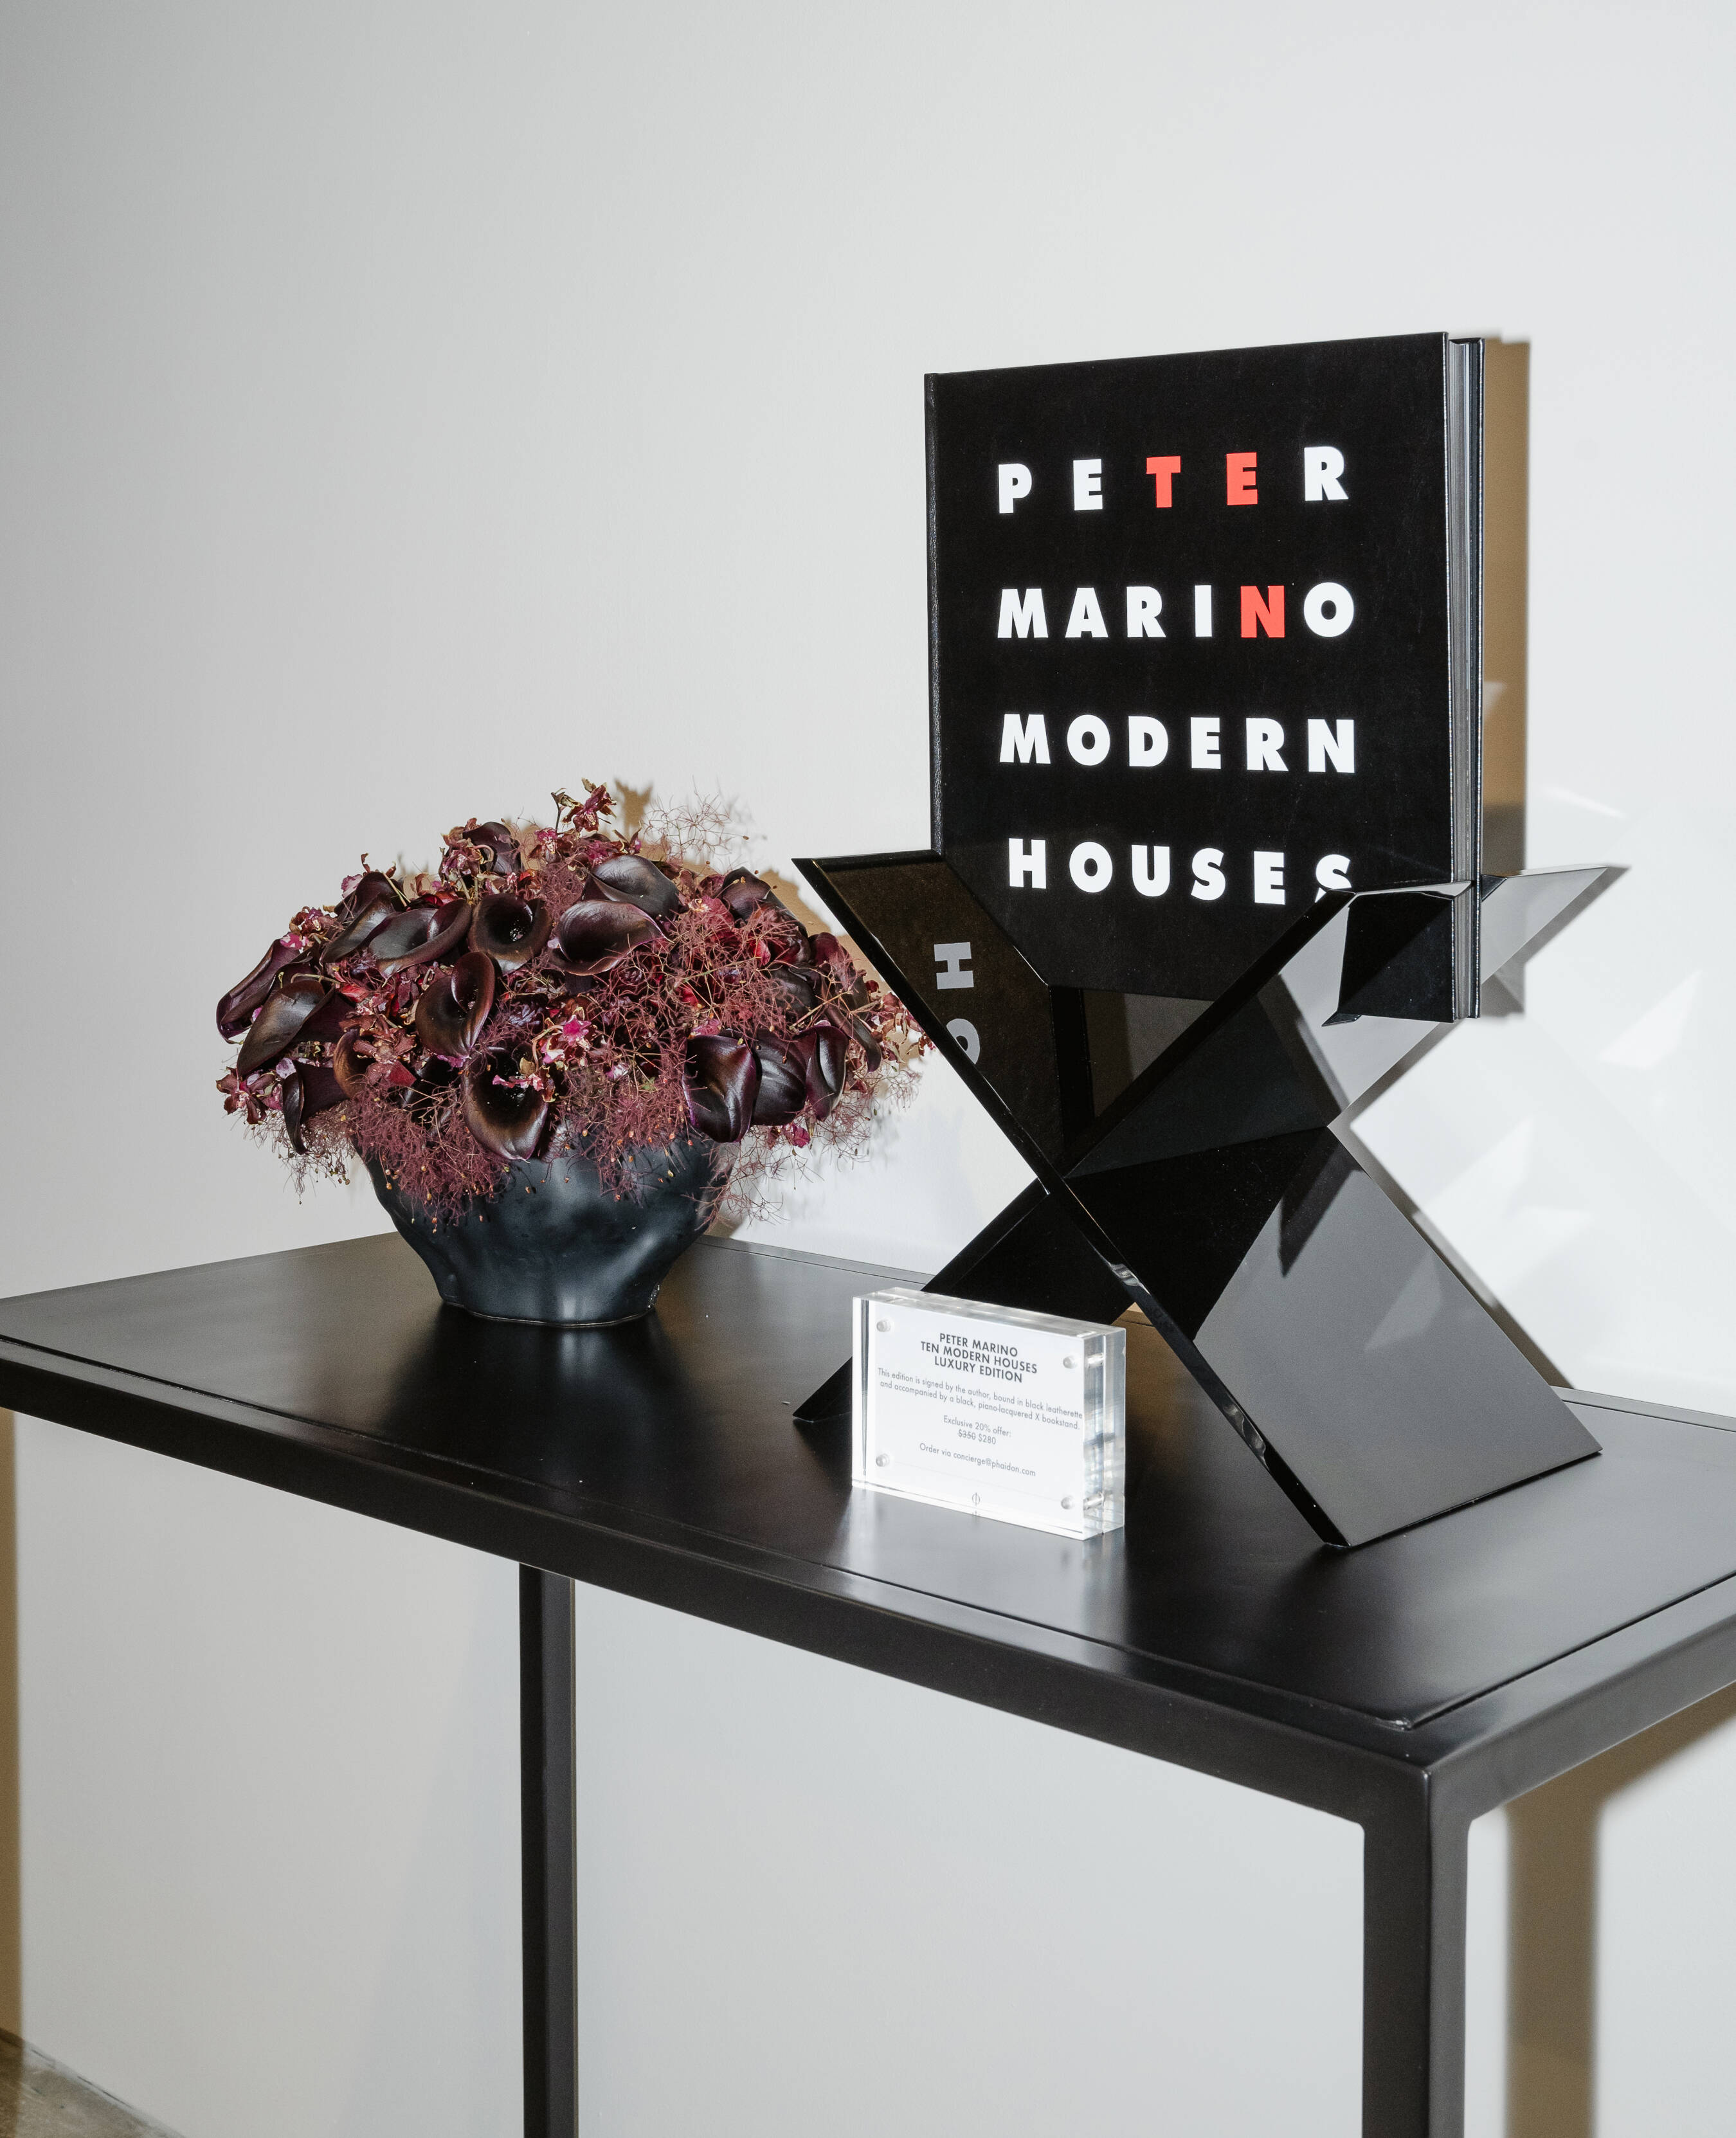 Phaidon and Sotheby’s celebrate the publication of Peter Marino’s latest book TEN MODERN HOUSES